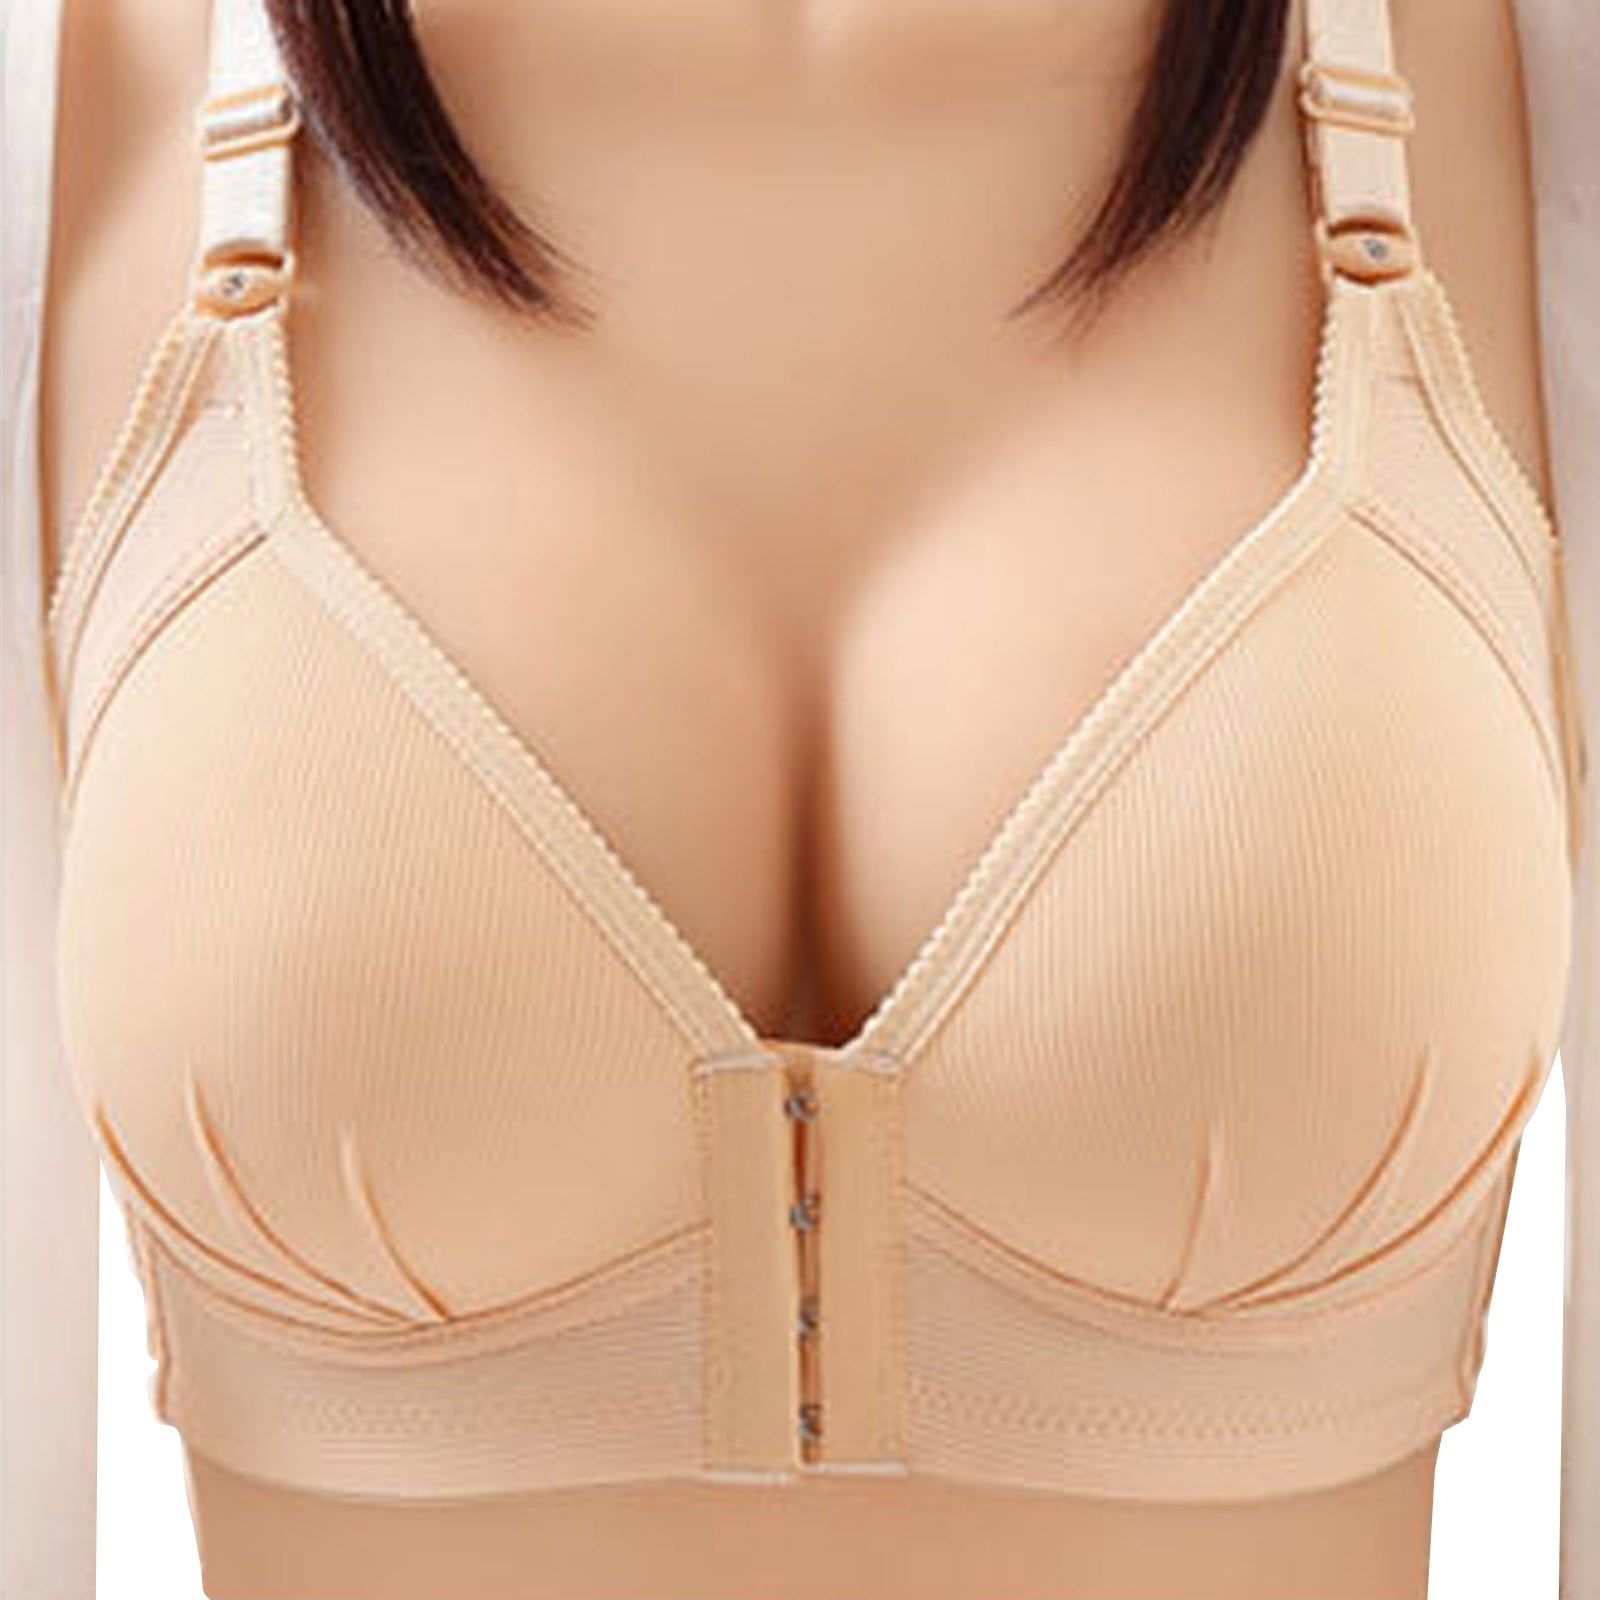 Xysaqa Front Closure Bras for Women Push Up Wireless Bra Seamless Comfy  Full-Coverage Brassiere Plus Size Everyday Wear